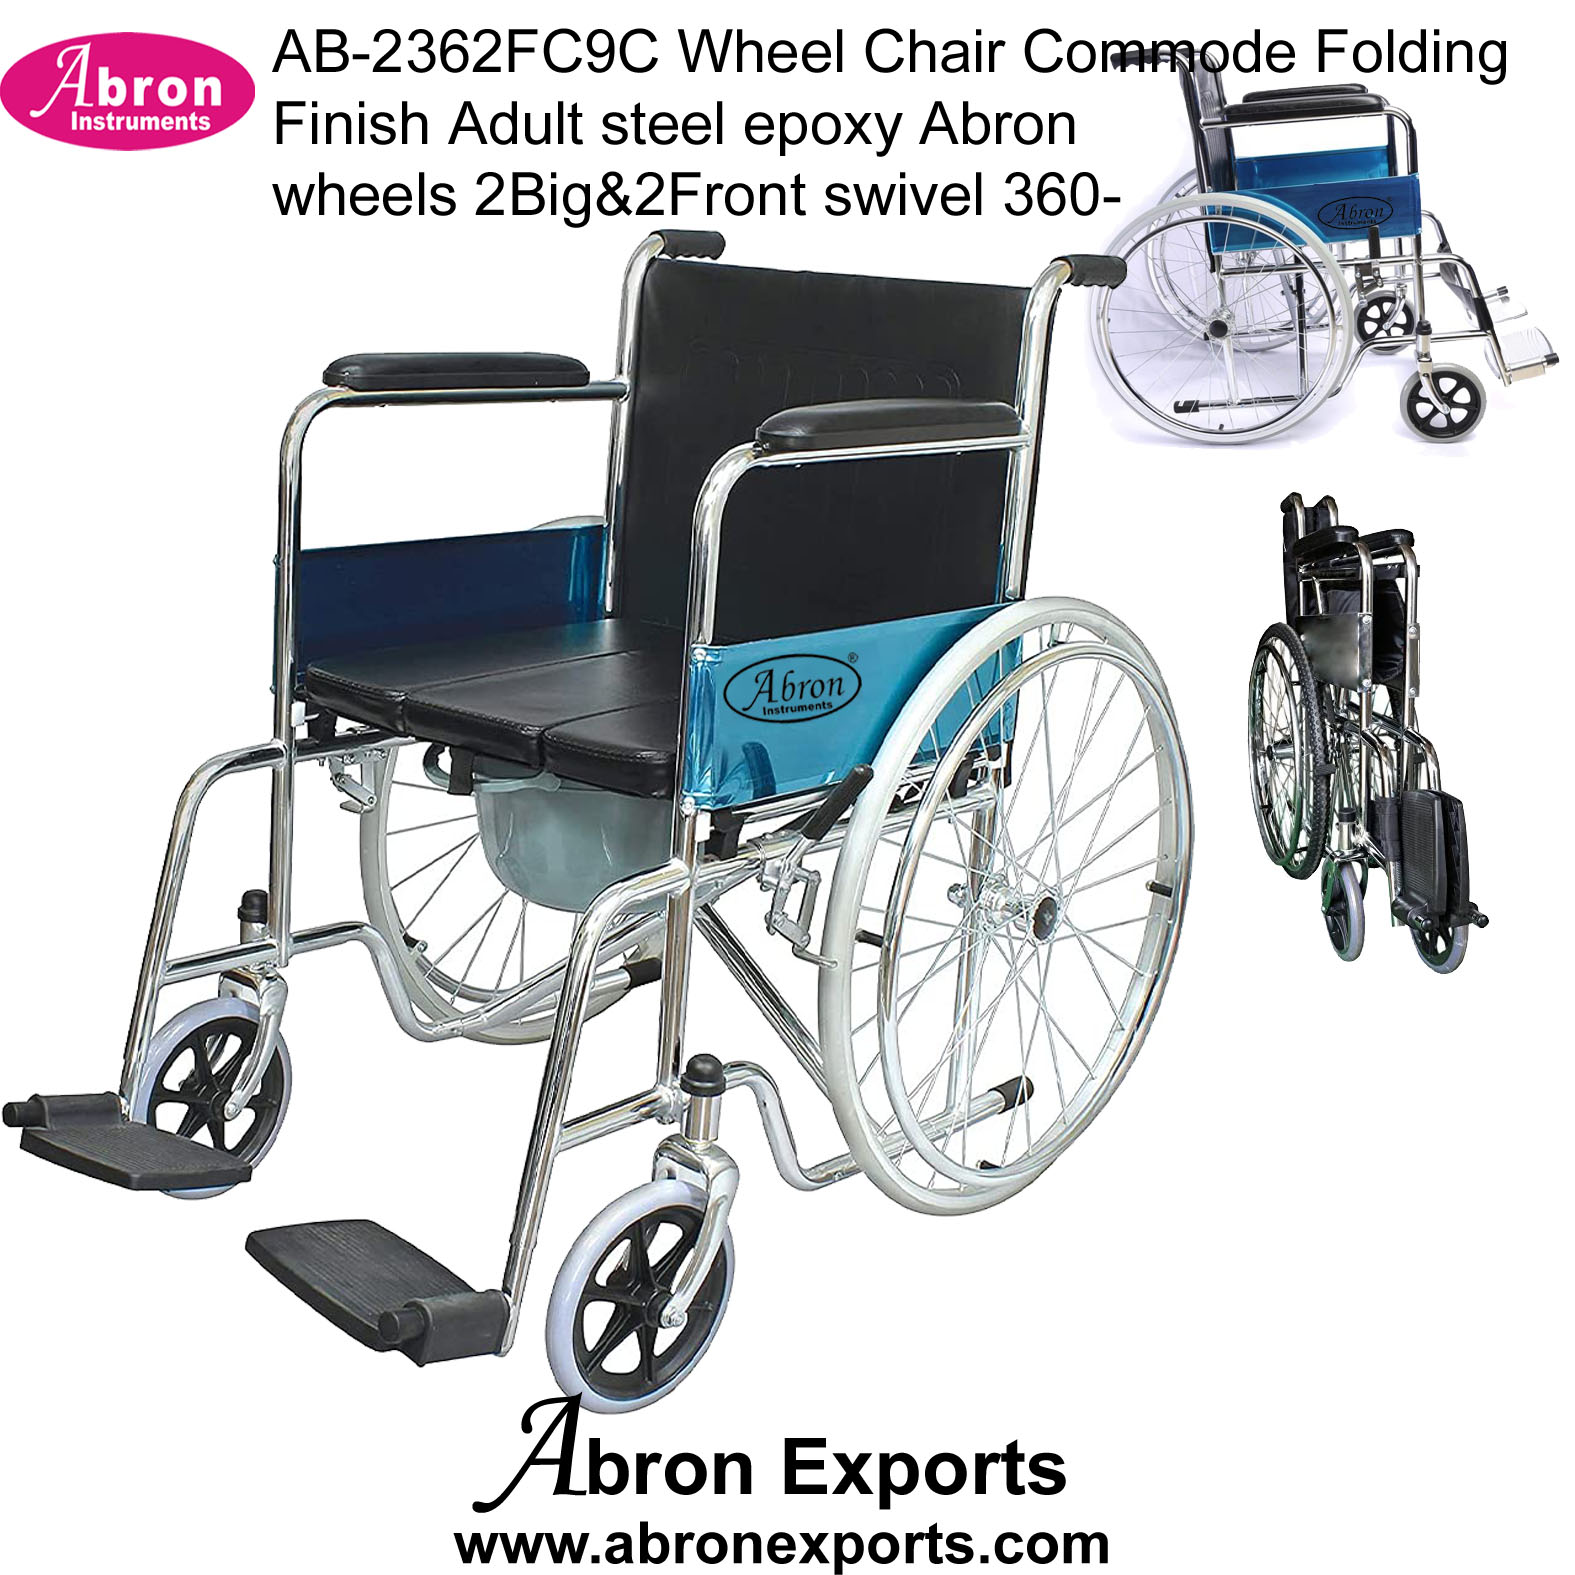 Wheel Chair Black Folding with commode Adult steel epoxy wheels 2big & 2front swivel 360 swing feets excellent seat arm rest Abron ABM-2362FC